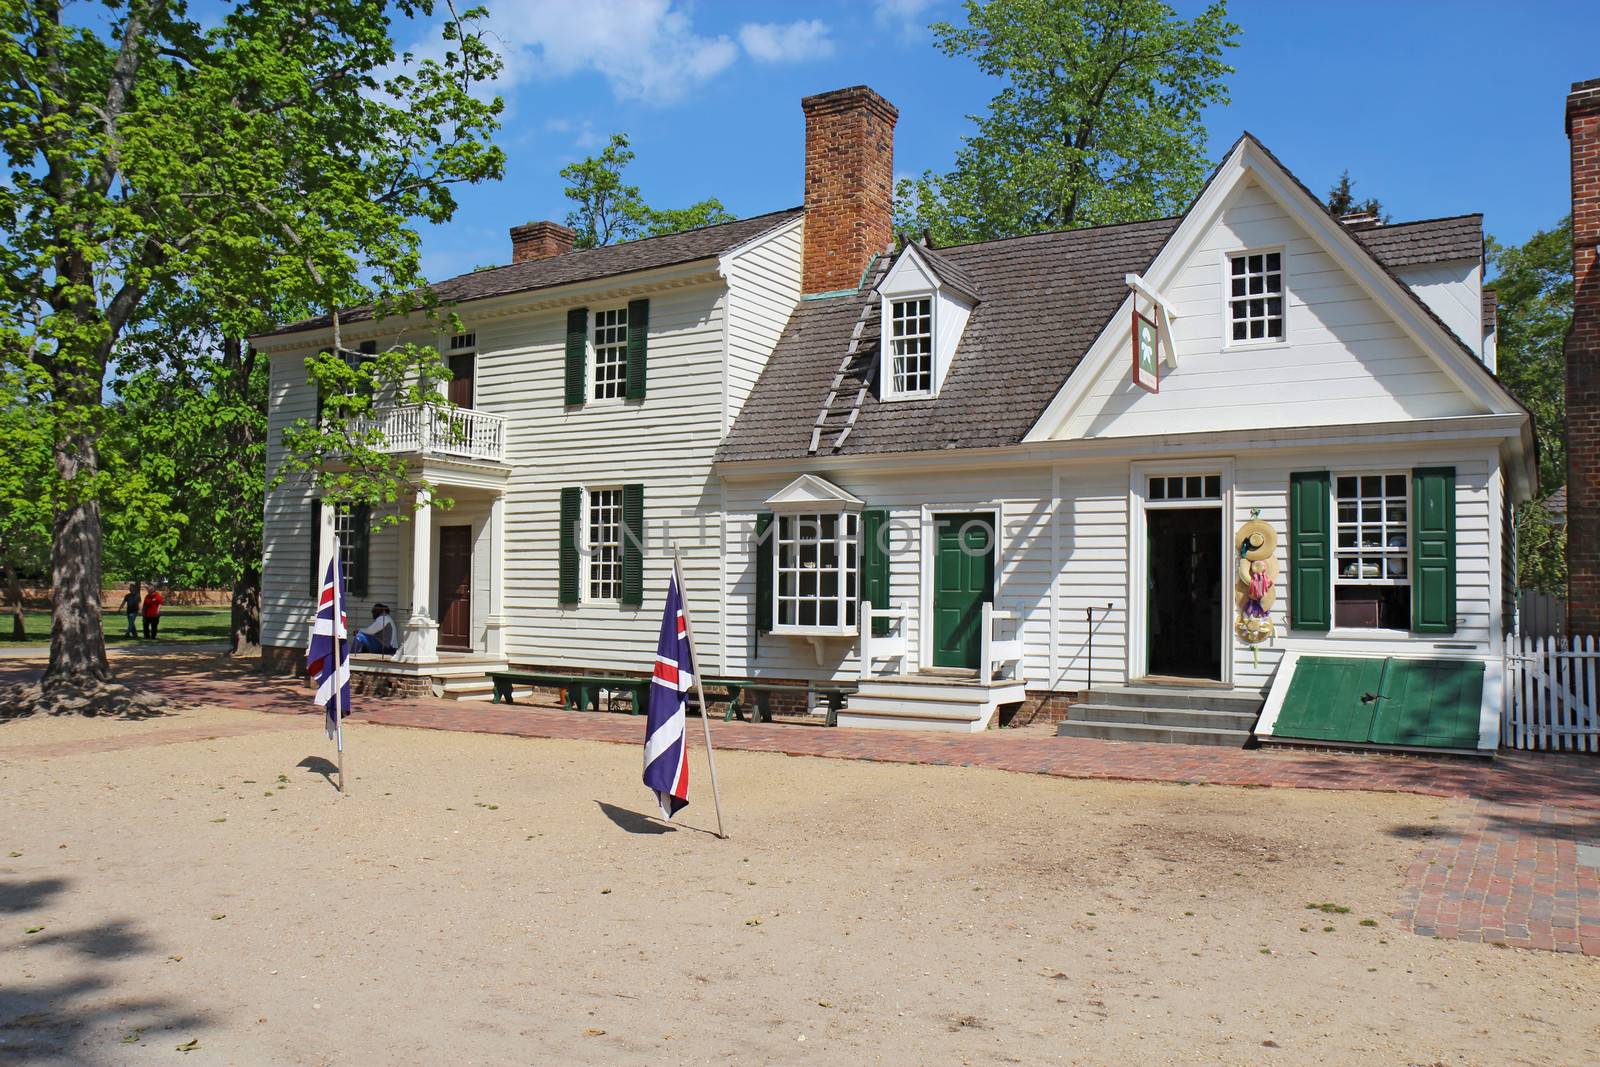 WILLIAMSBURG, VIRGINIA - APRIL 21 2012: The Mary Dickinson shop historic millinery in Colonial Williamsburg. The restored town is a major attraction for tourists and meetings of world leaders.